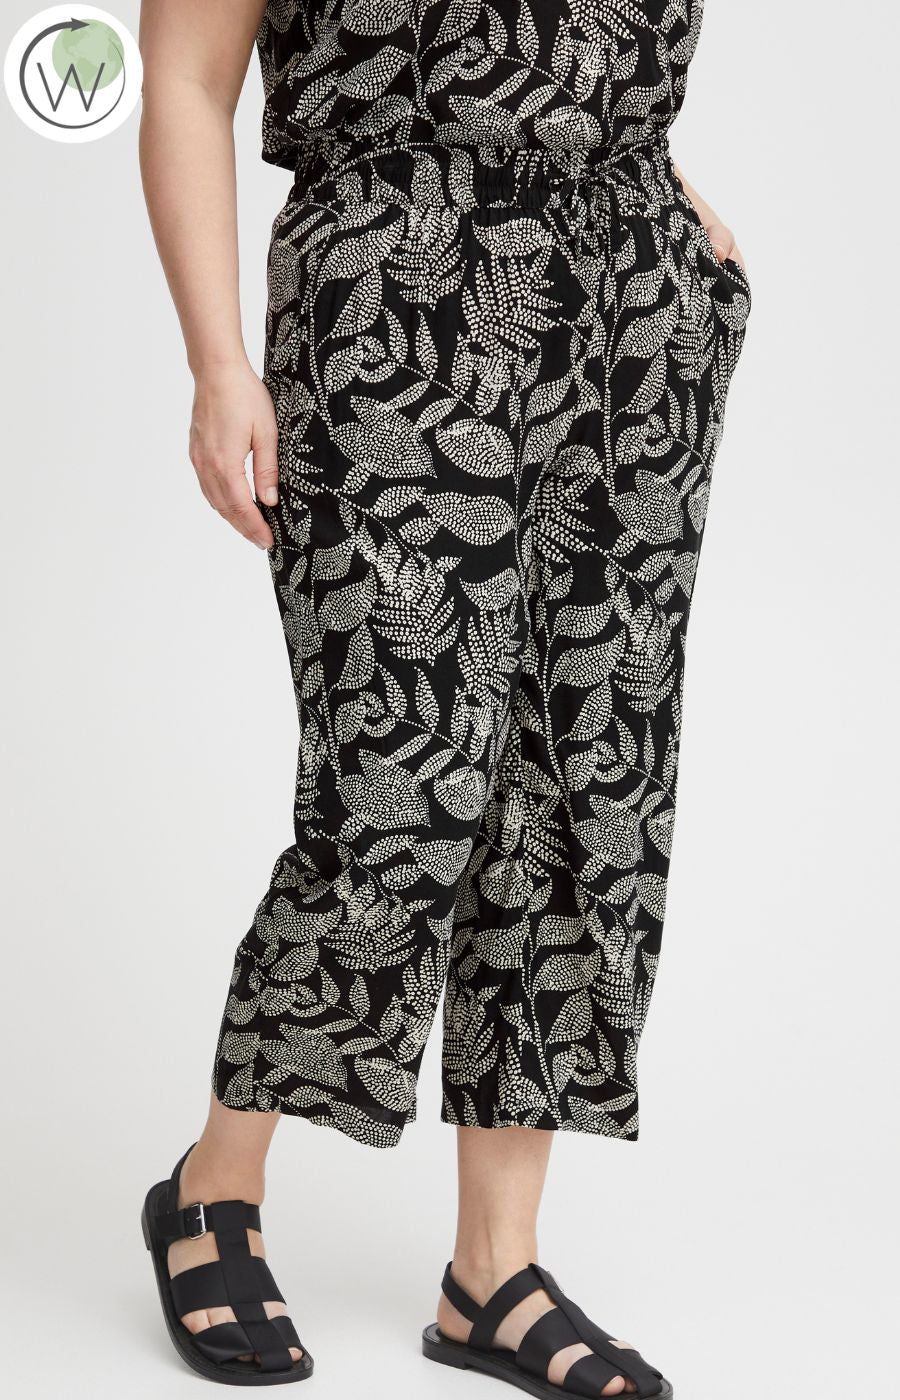 Fransa Plus Culottes in Speckled Leaf Print